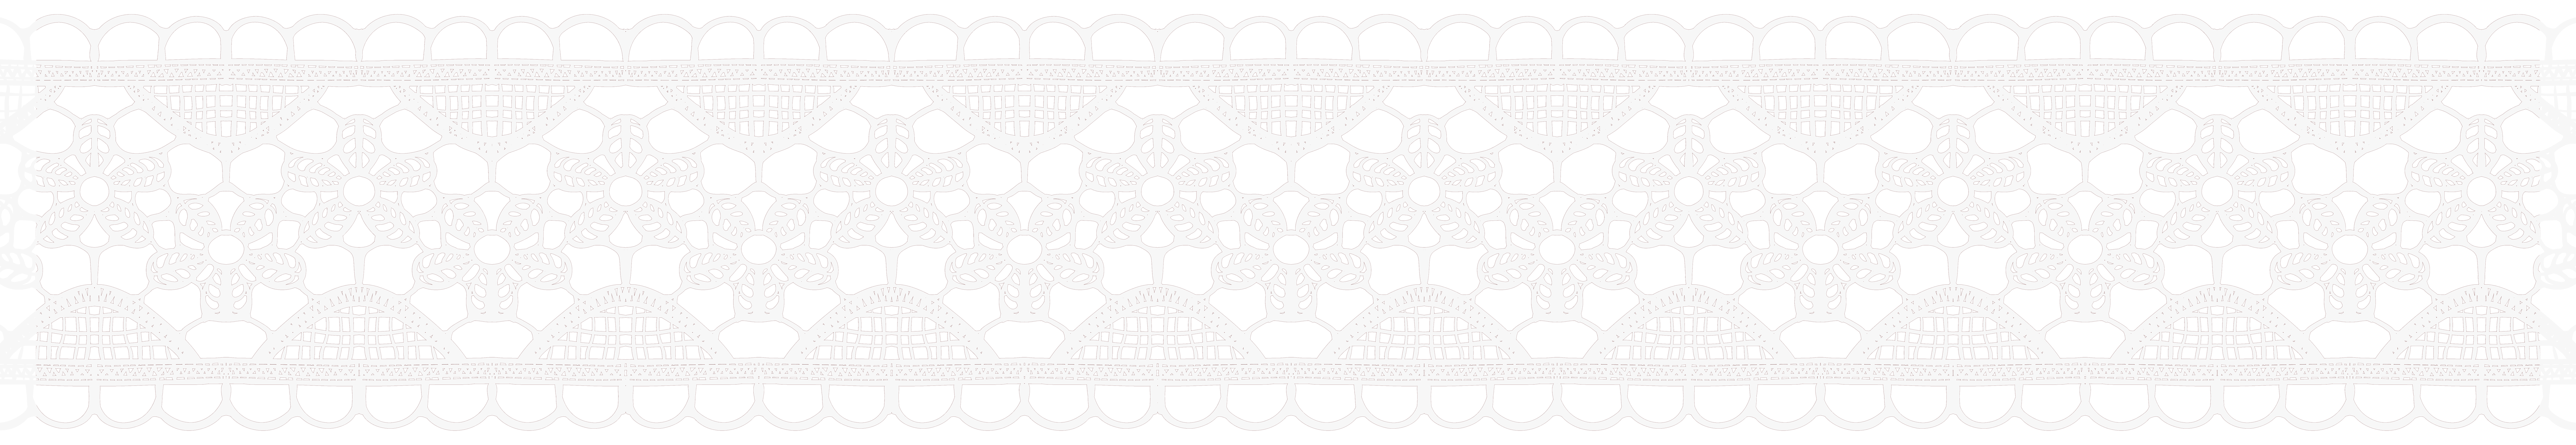 Black and white product. Line clipart lace